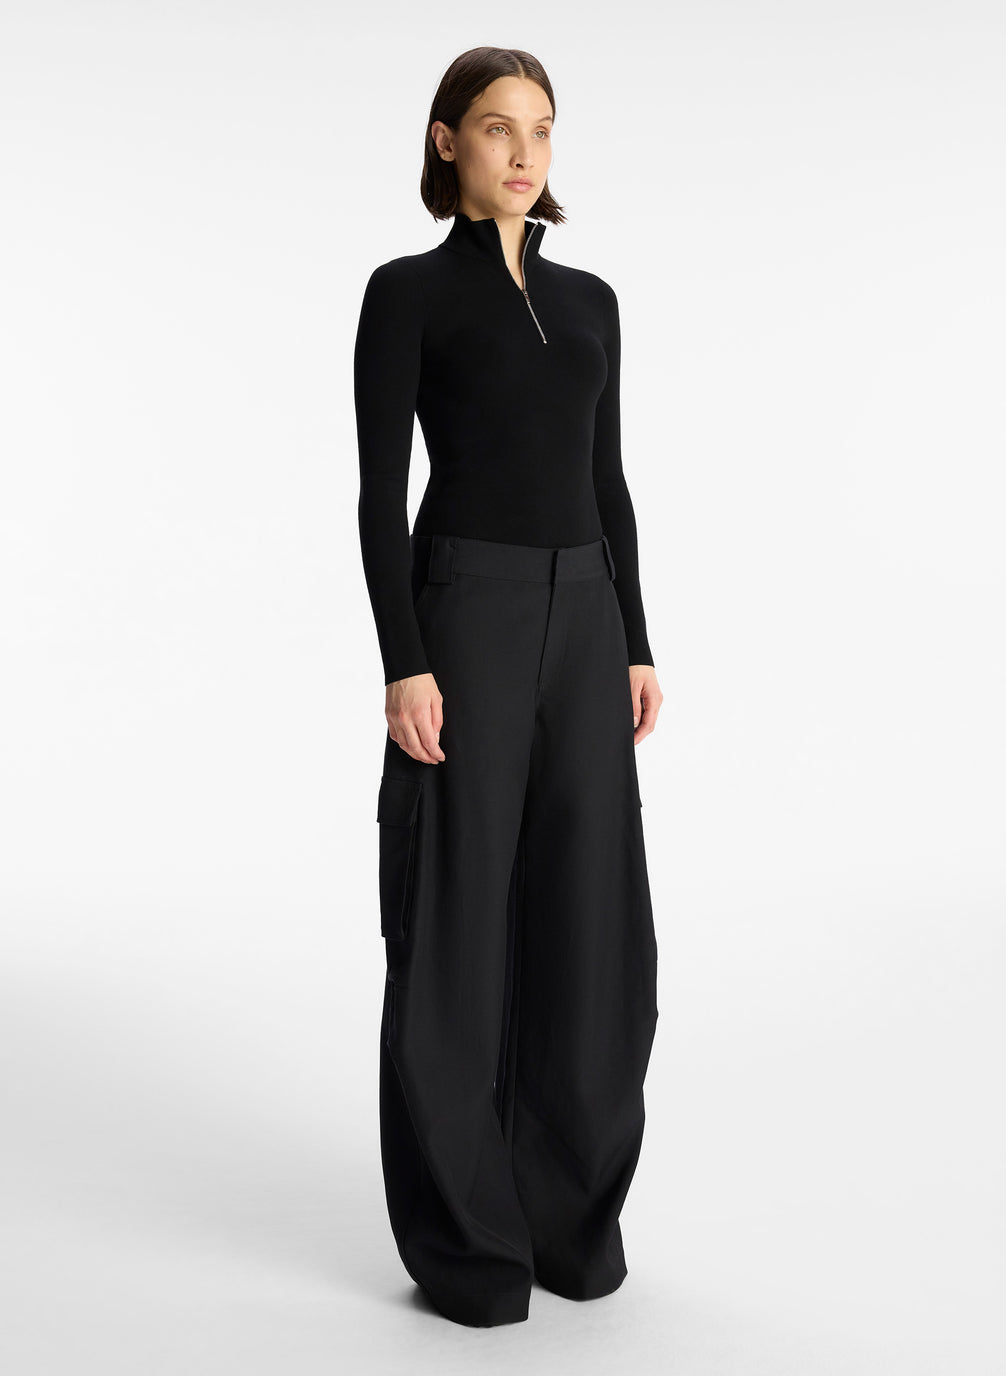 side view of woman wearing black half zip compact knit long sleeve top and black pants